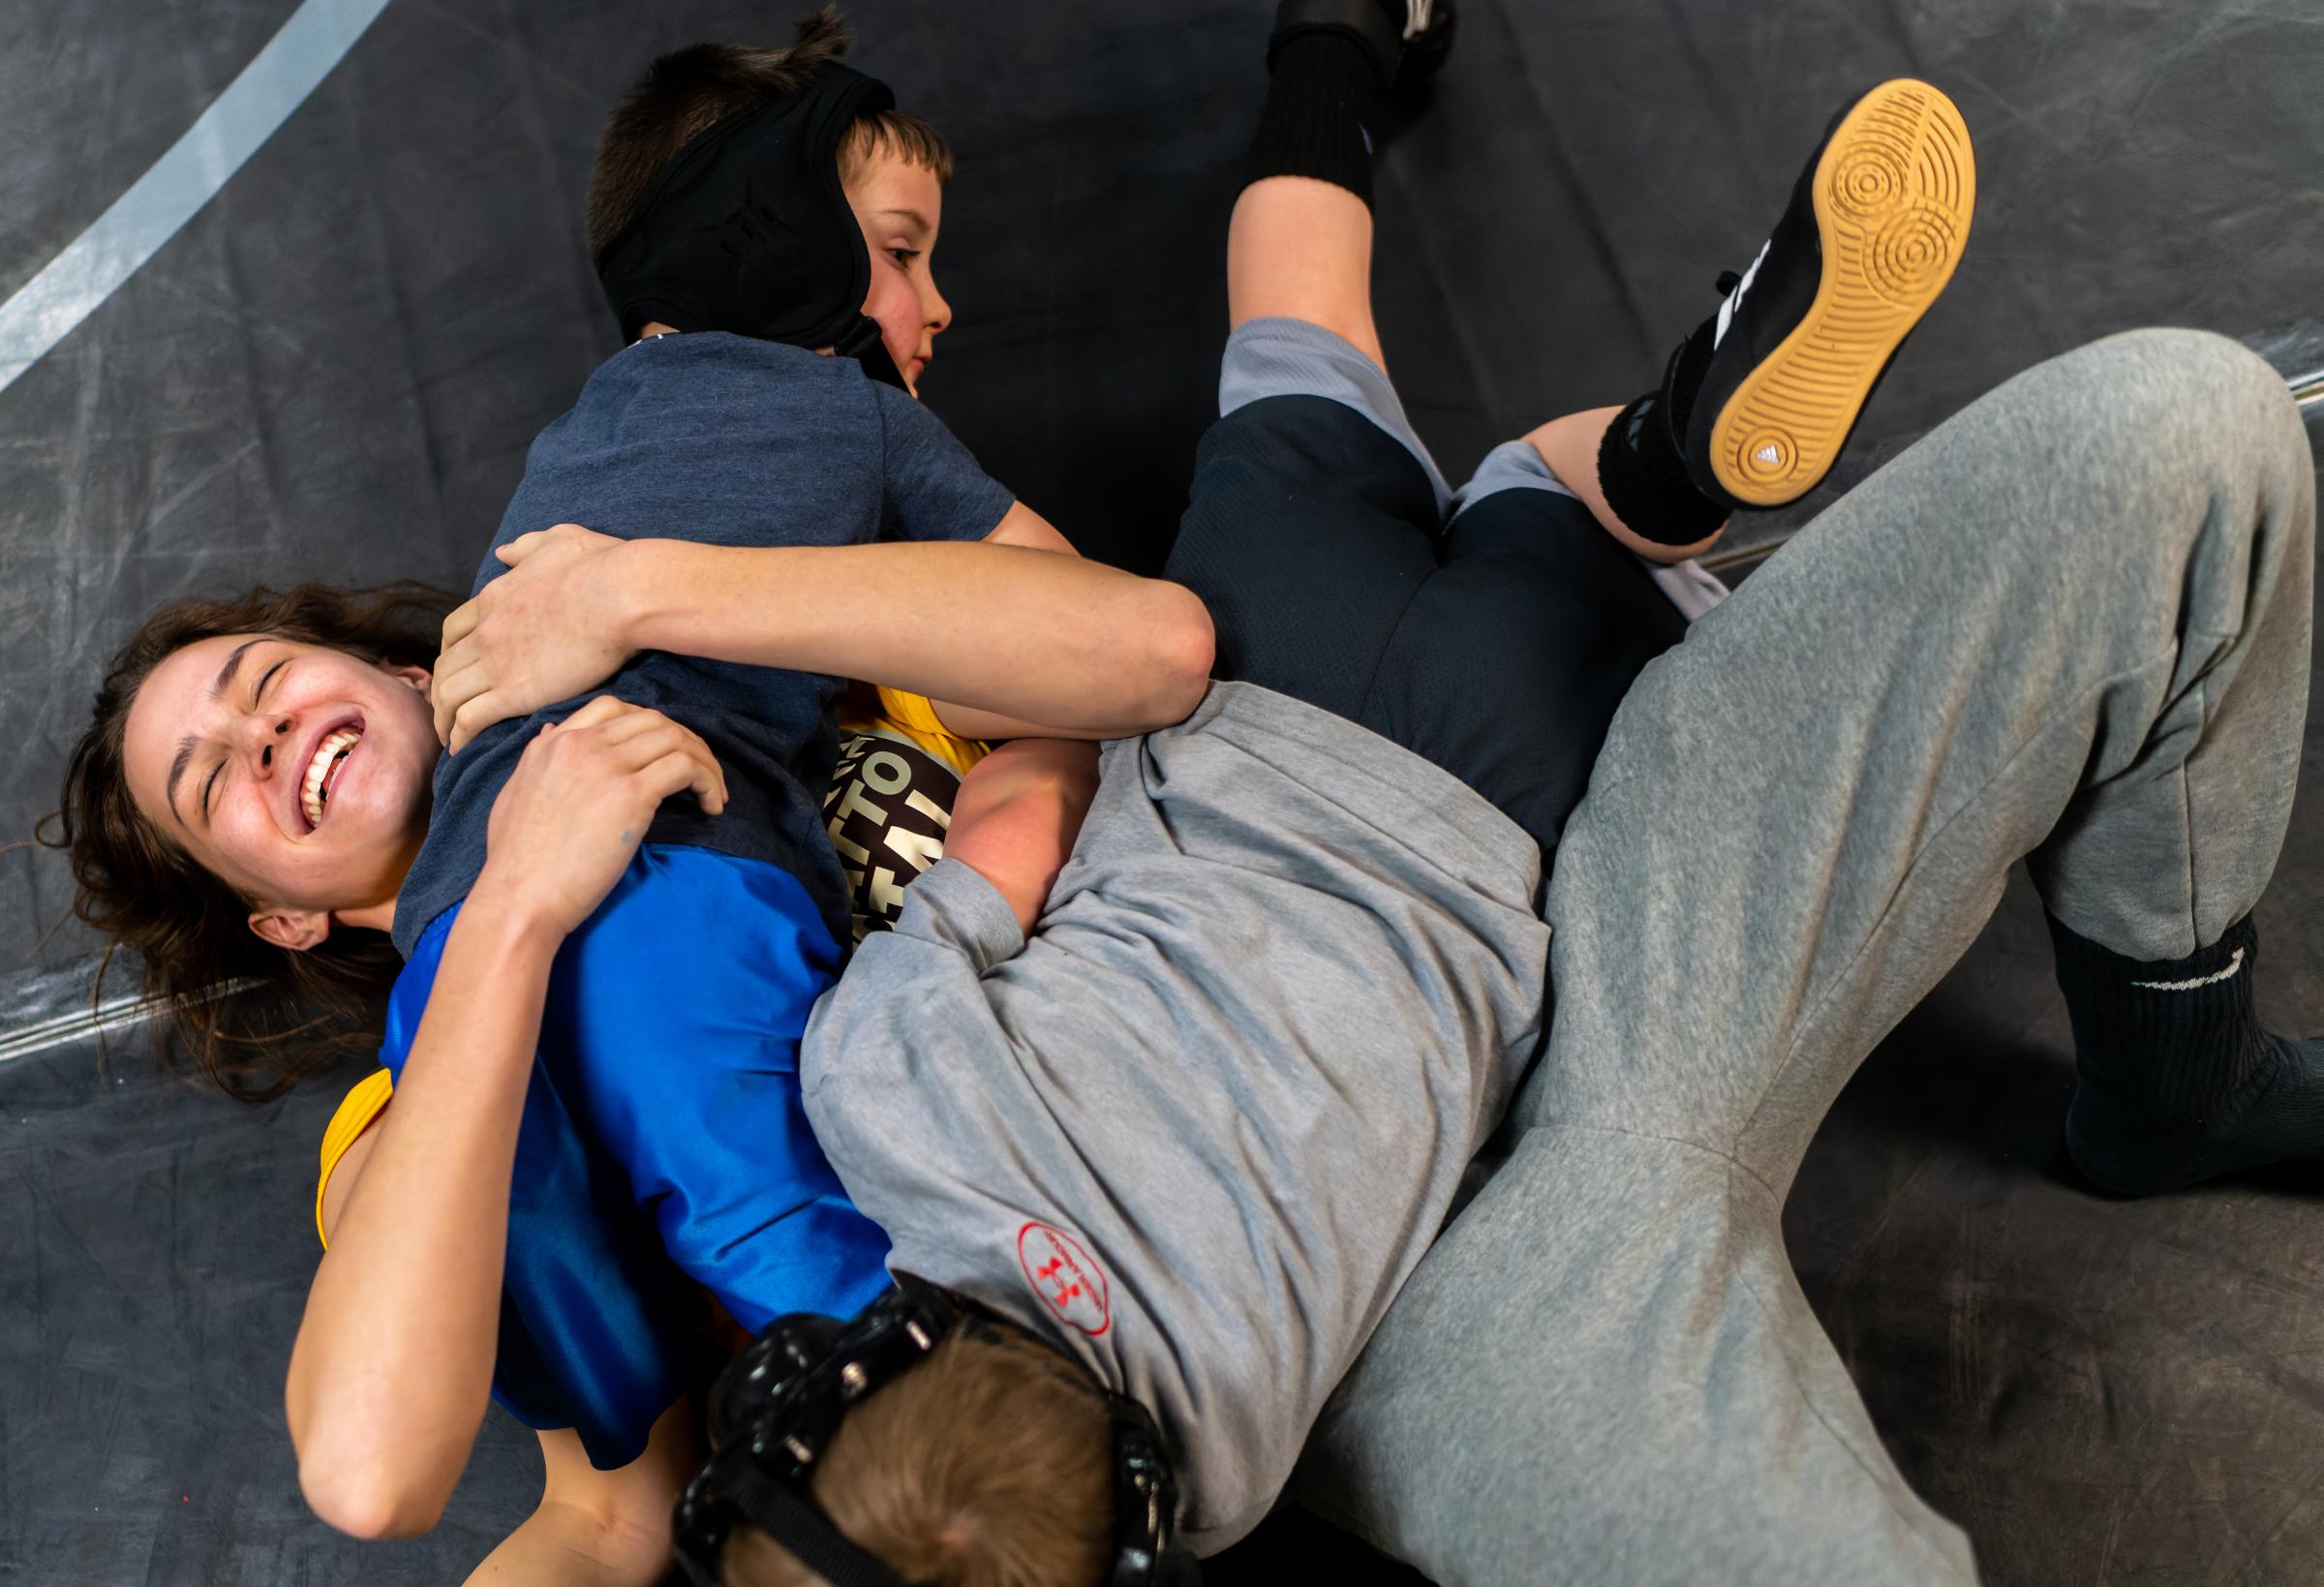 Building a Champion - Teila has been wrestling since she was a kid when she...